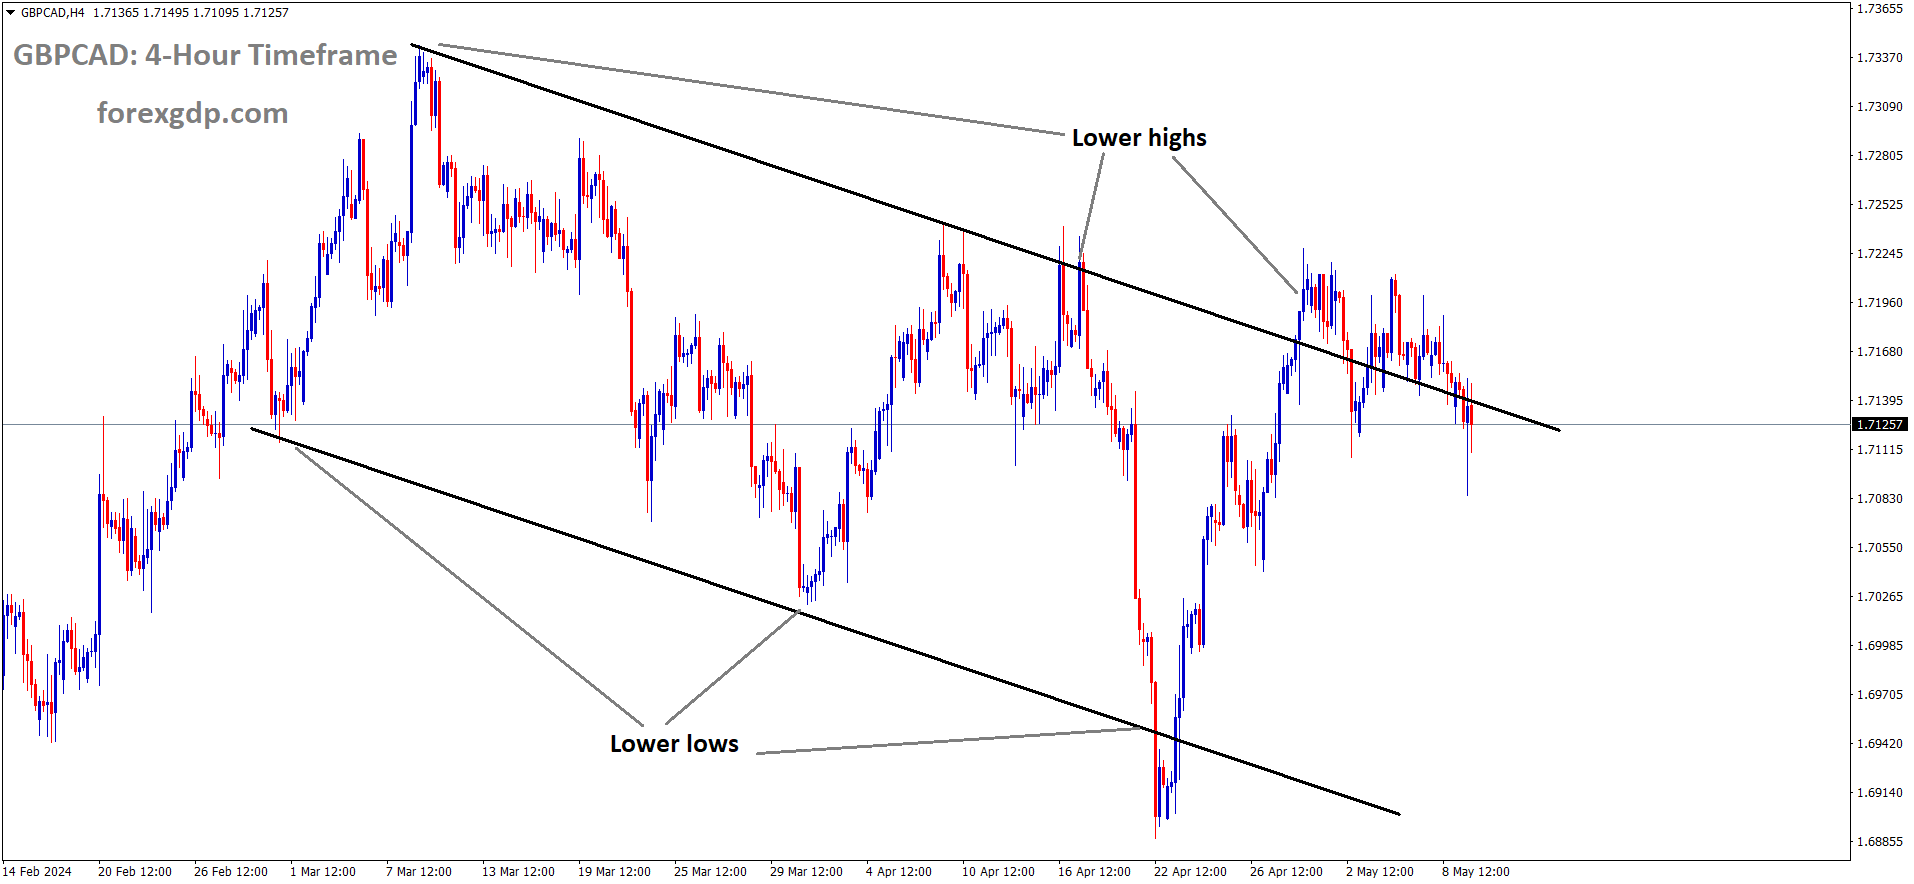 GBPCAD is moving in Descending channel and market has reached lower high area of the channel